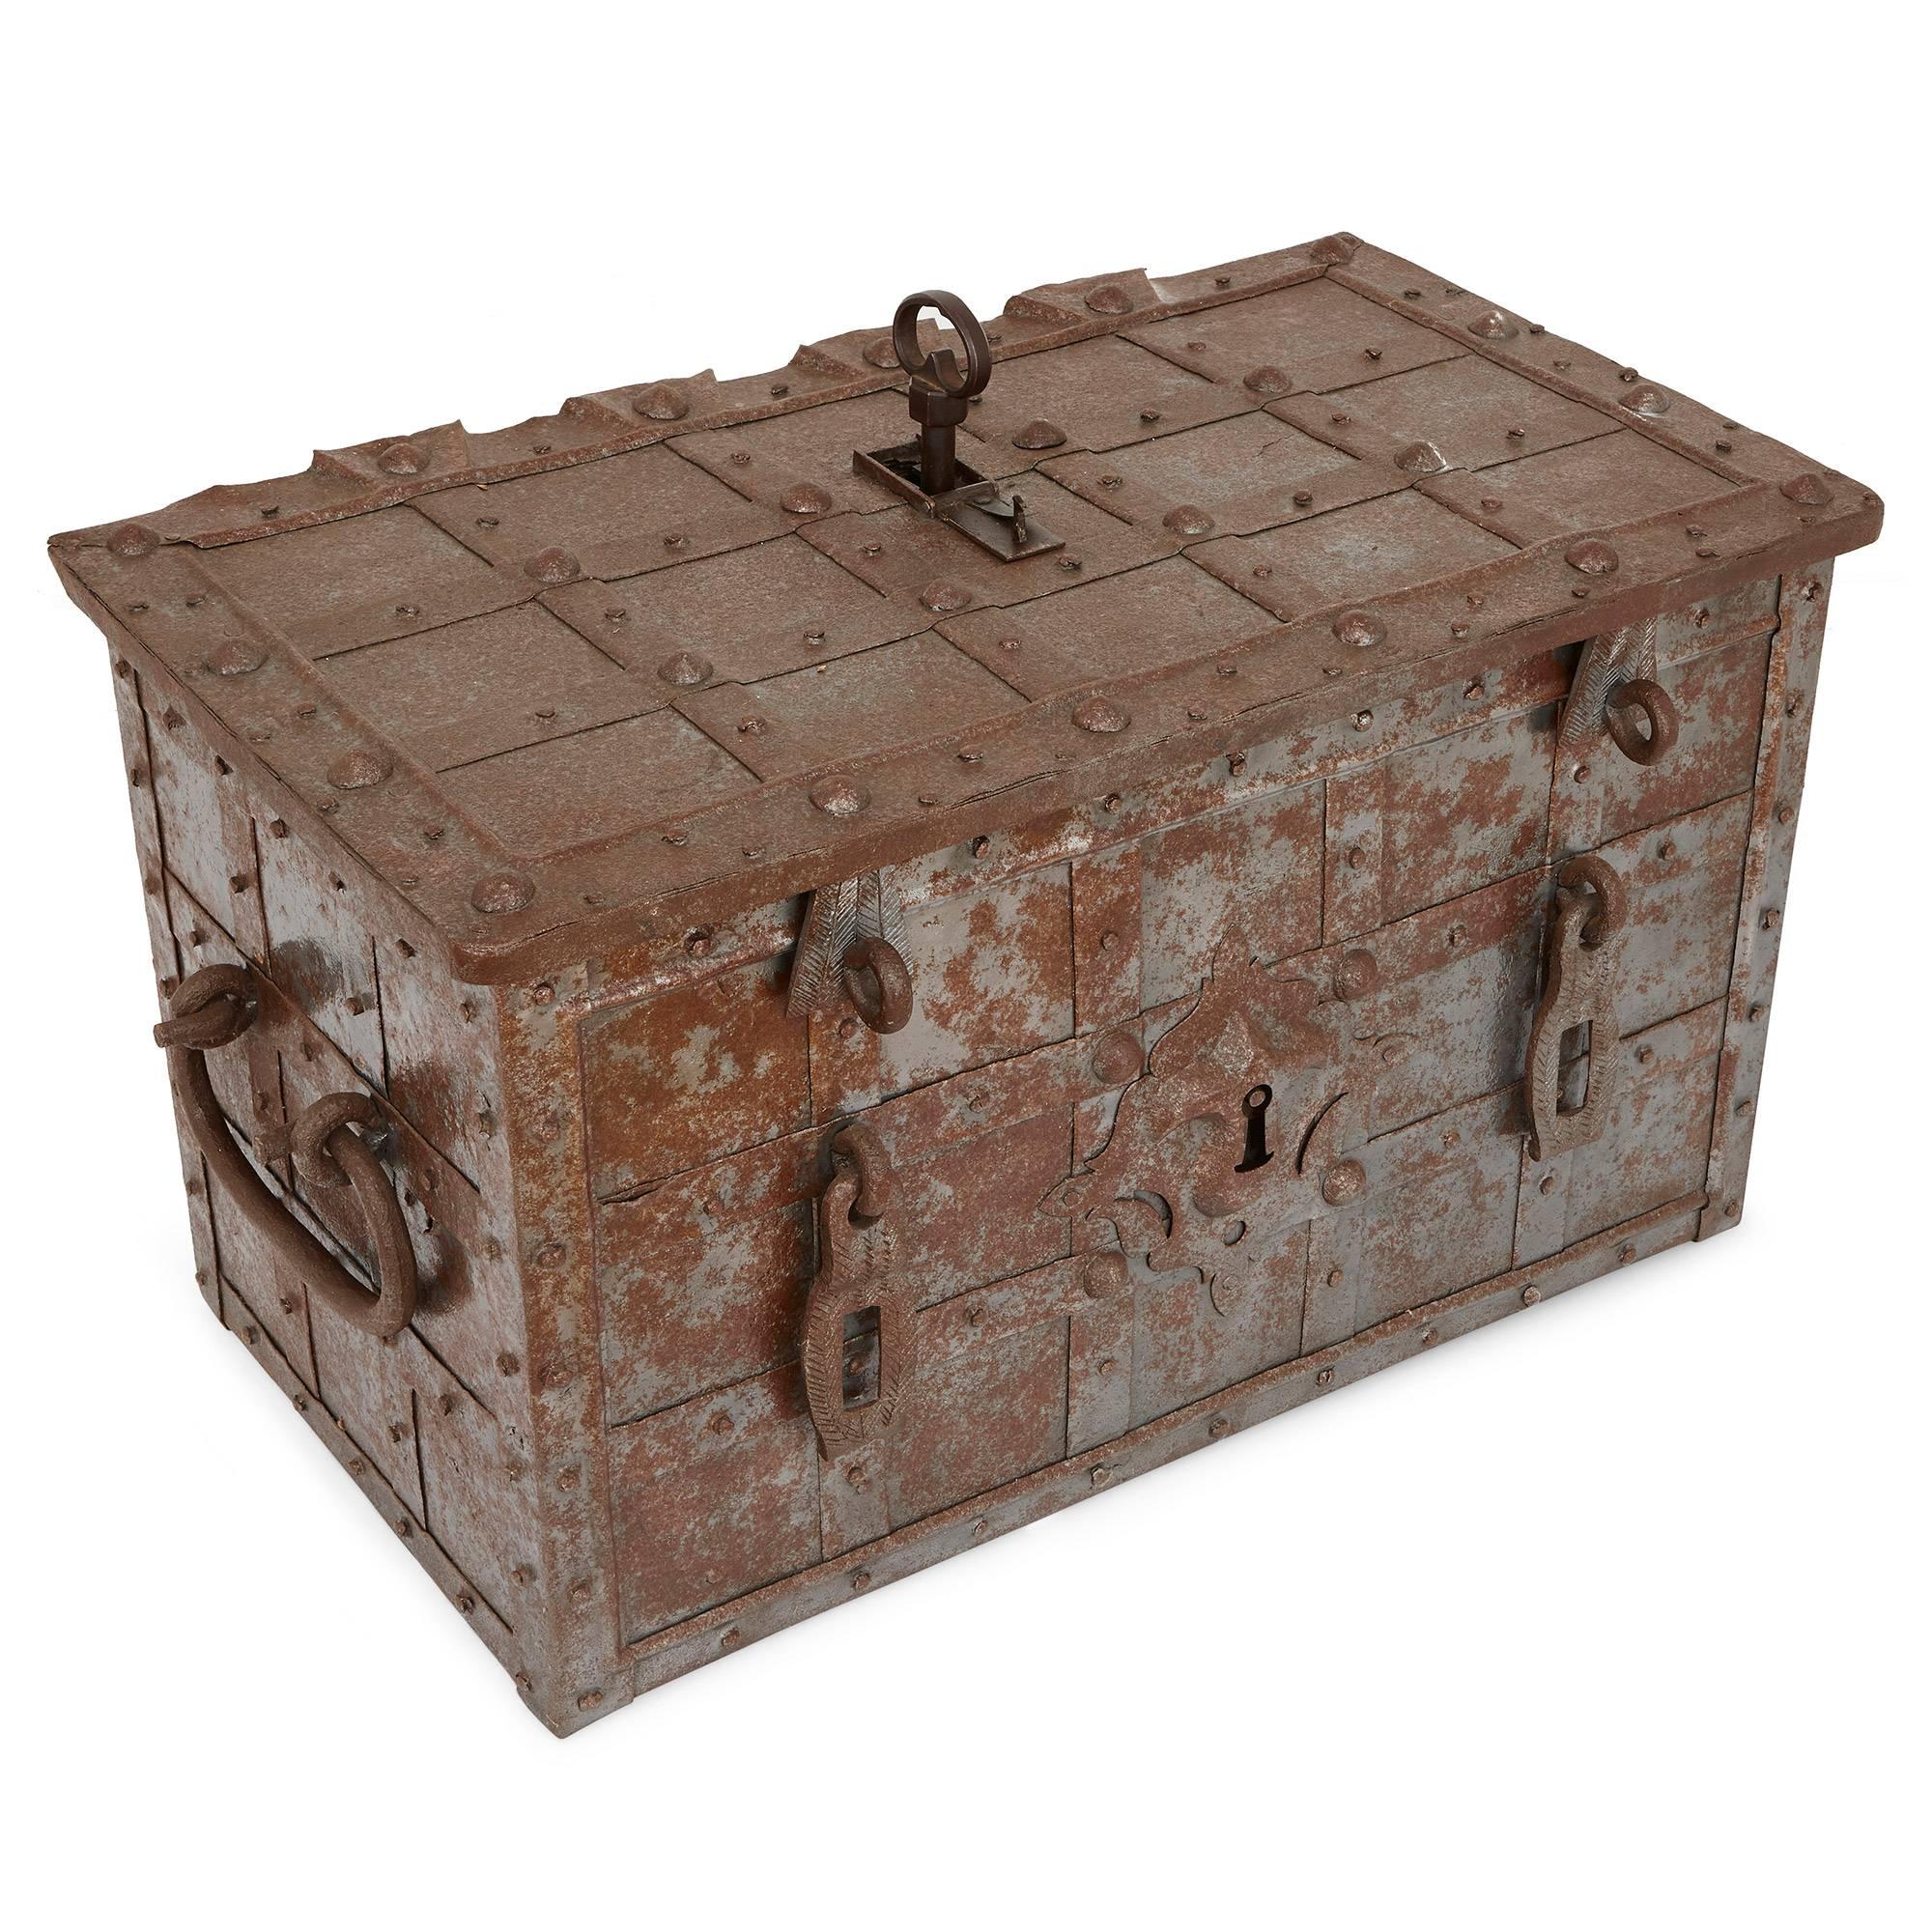 Crafted entirely of steel in rectangular form, the trunk features a pinned lattice all over the exterior and handles at either side. The top panel of the trunk can be opened by hinges at the rear, and the trunk is secured with multiple locks. There